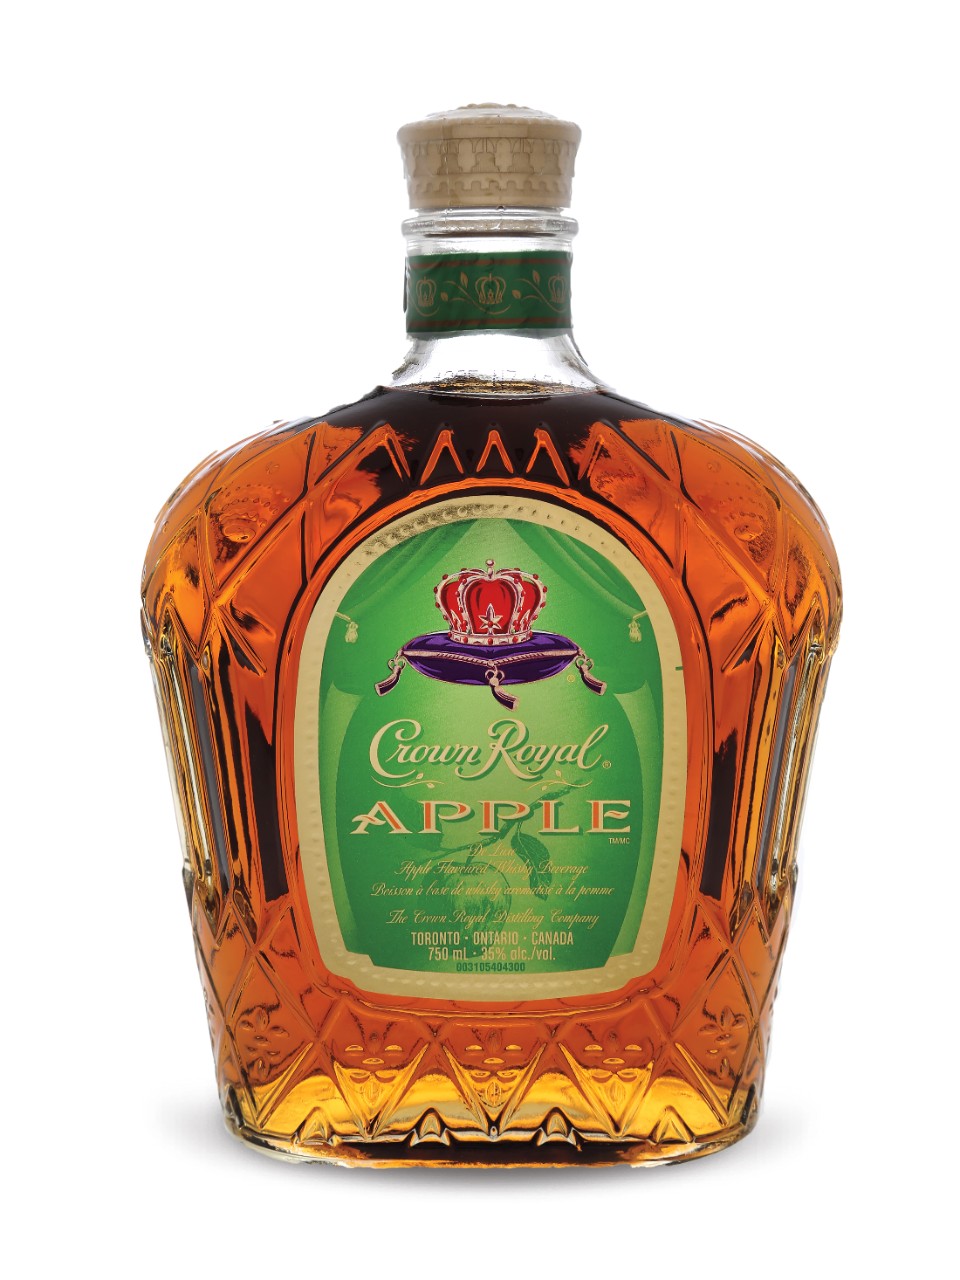 CROWN ROYAL APPLE WHISKEY .750 for only $24.99 in online ...